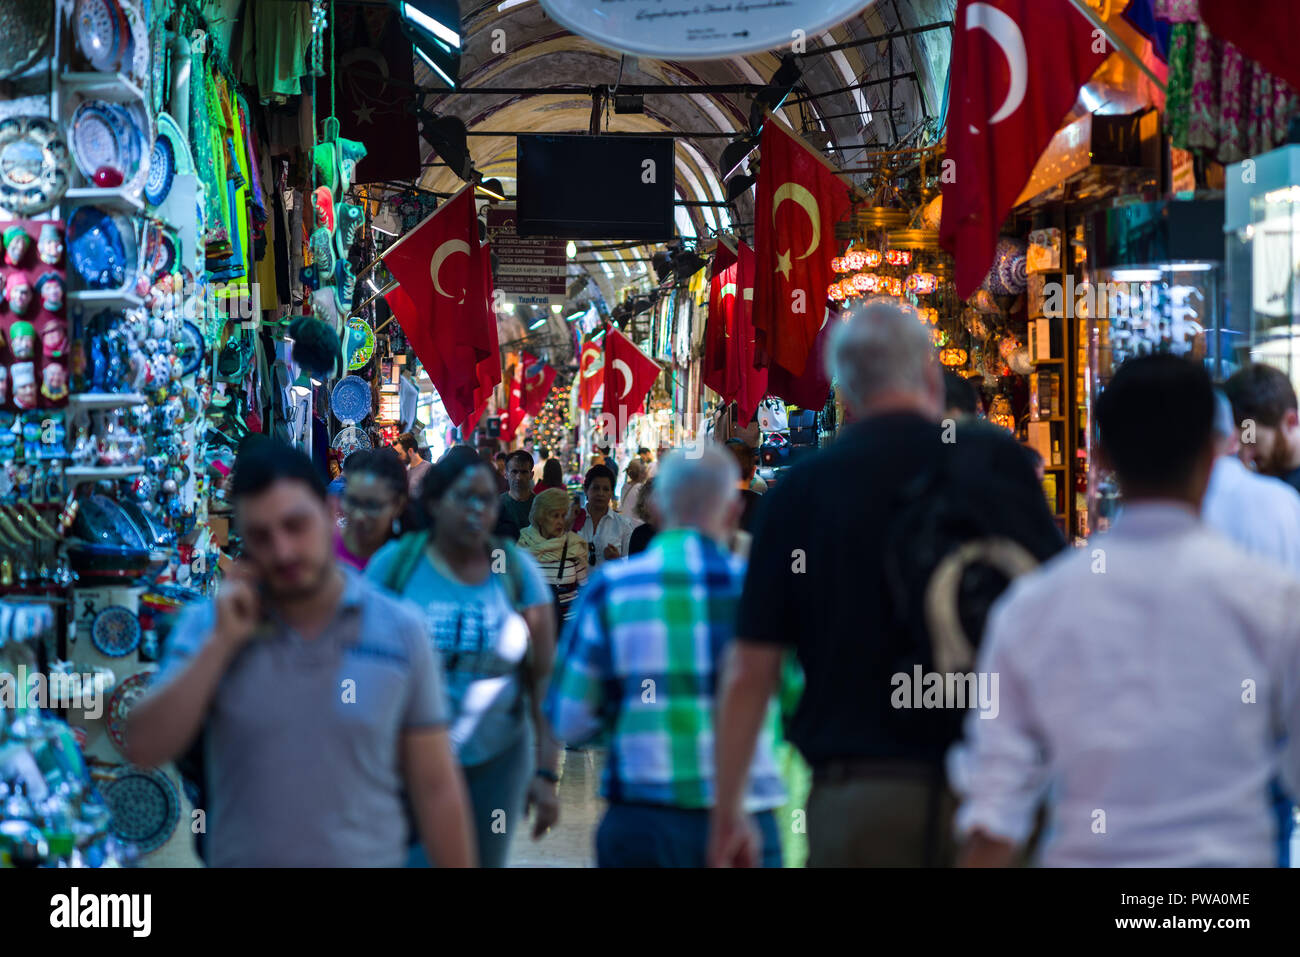 View of the Kapalı Çarşı or Grand Bazaar interior with people browsing items at the various small shops, Istanbul, Turkey Stock Photo